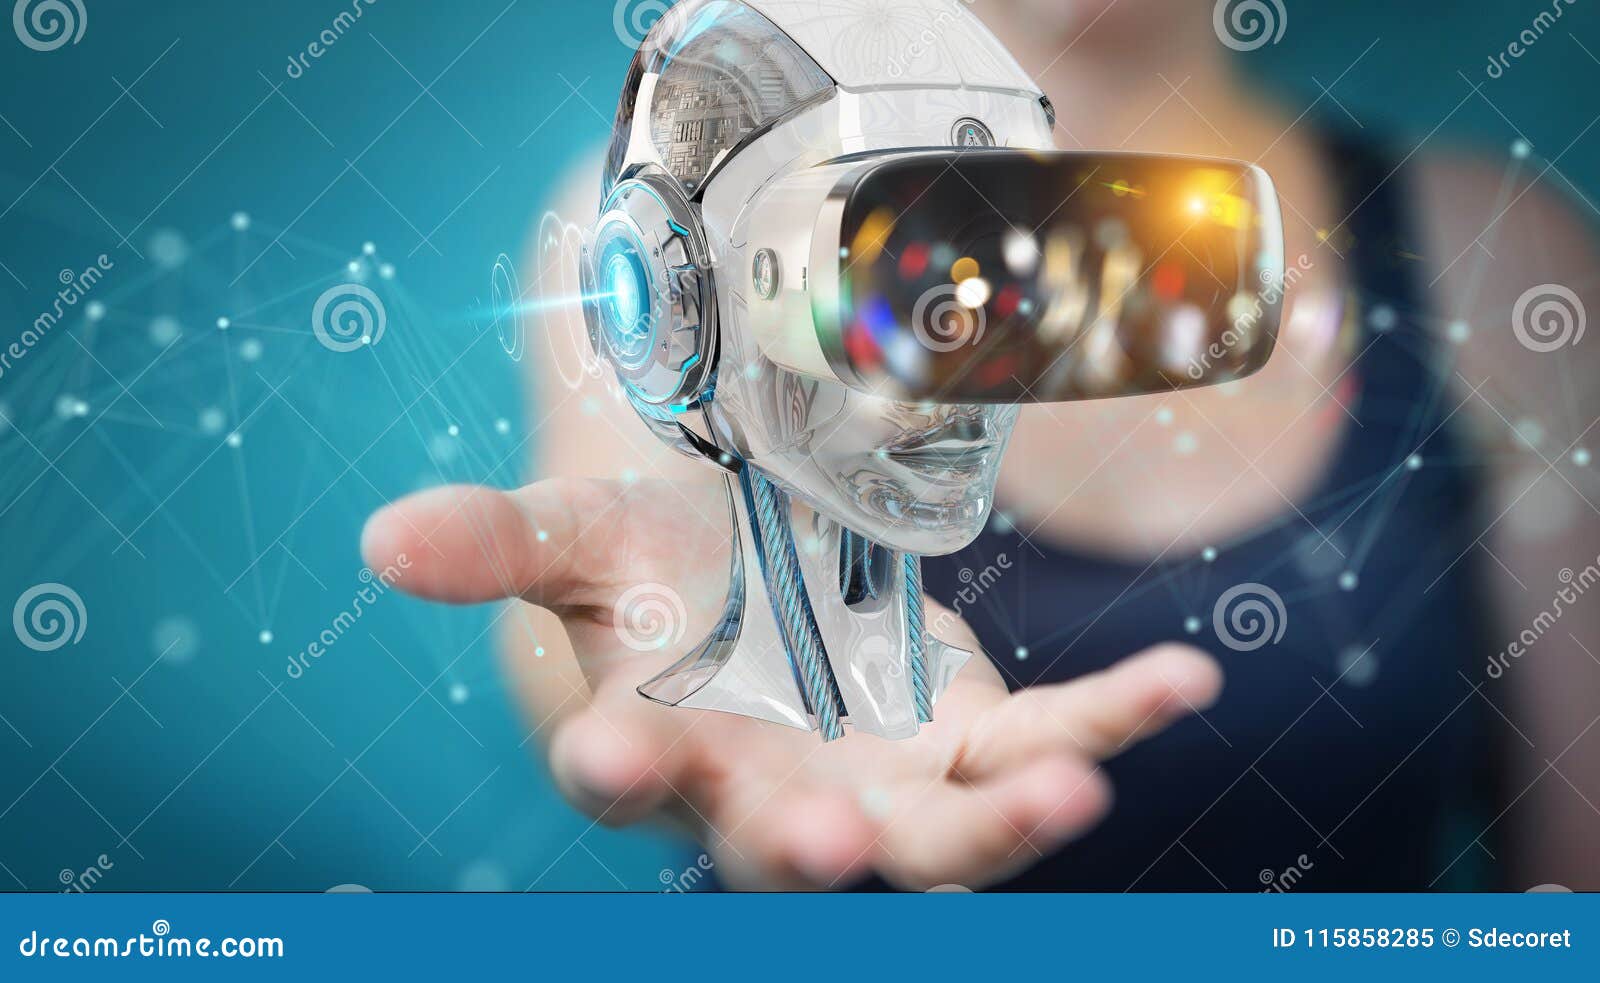 Virtual Reality And Artificial Intelligence